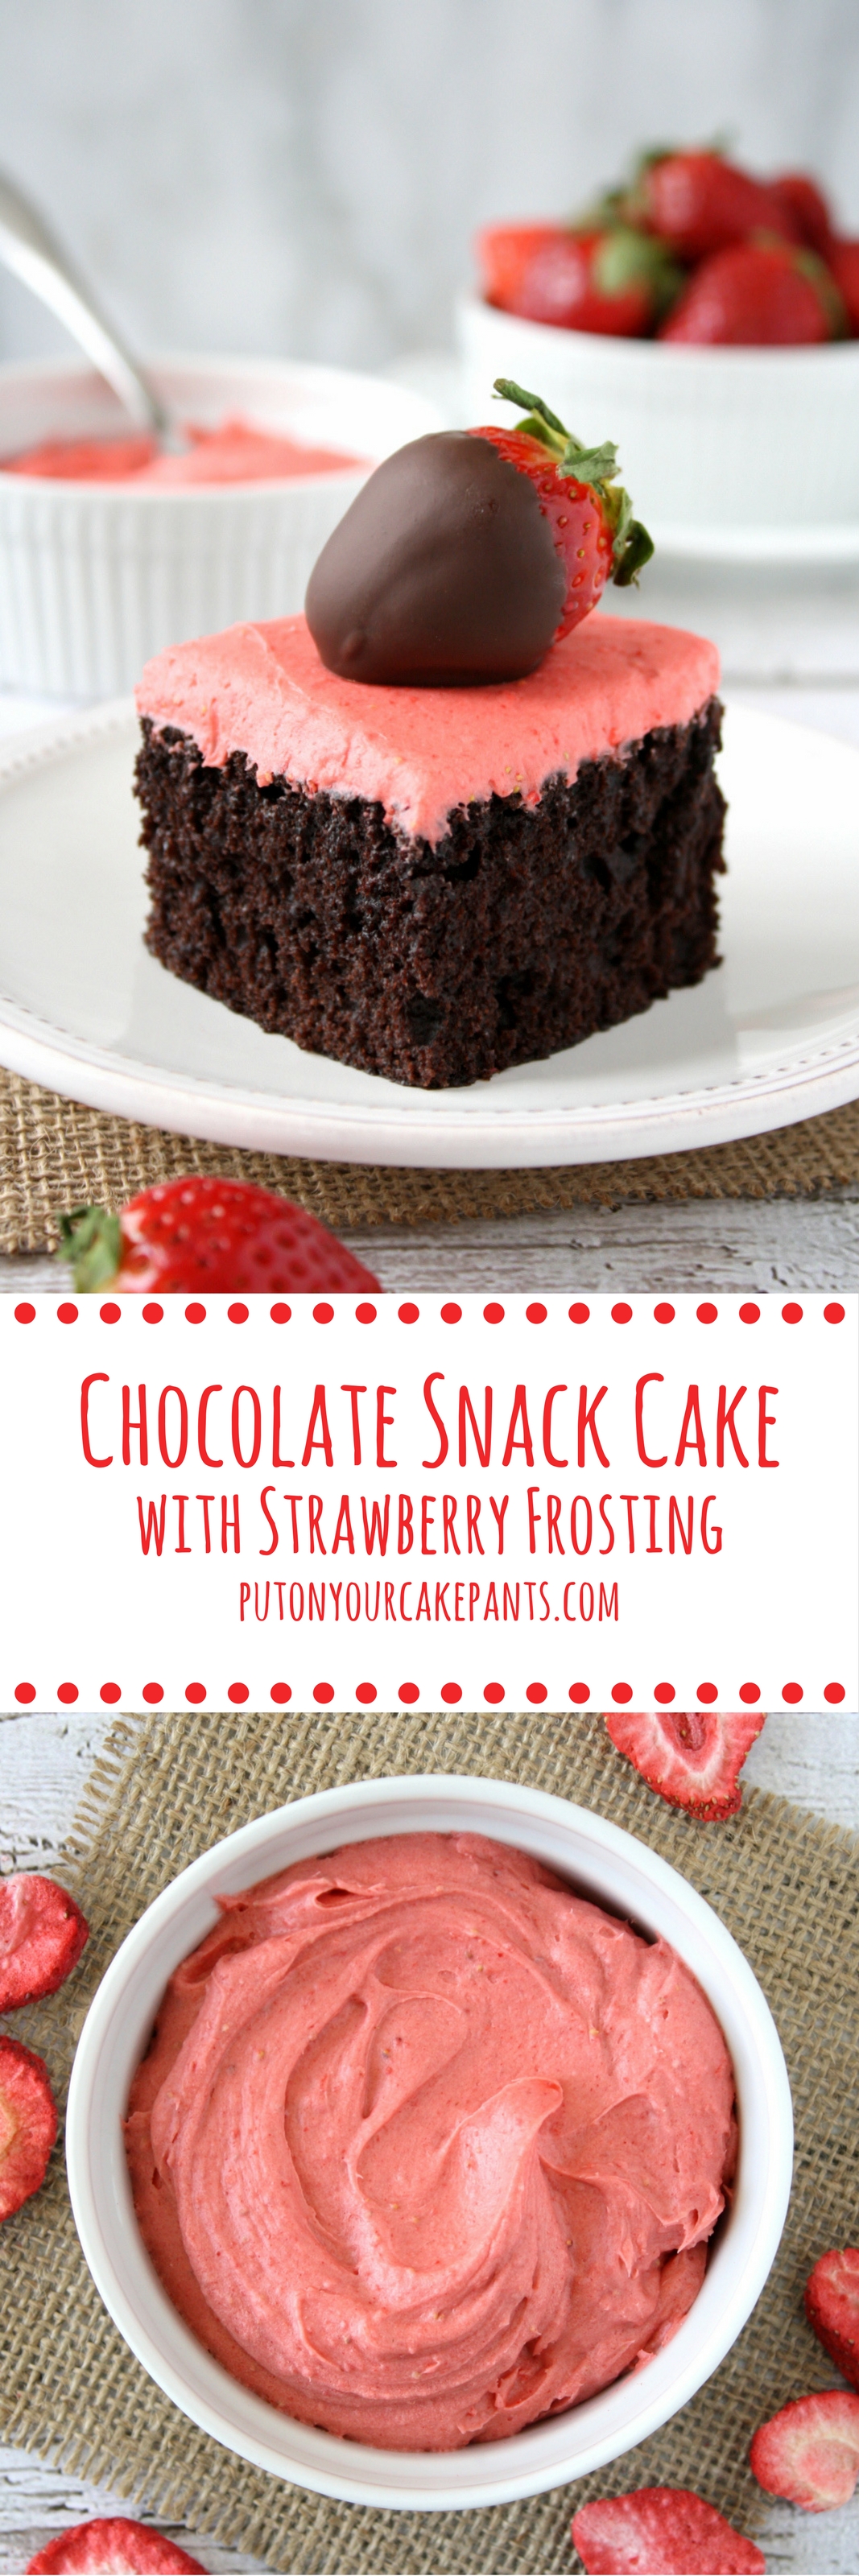 chocolate snack cake with strawberry frosting